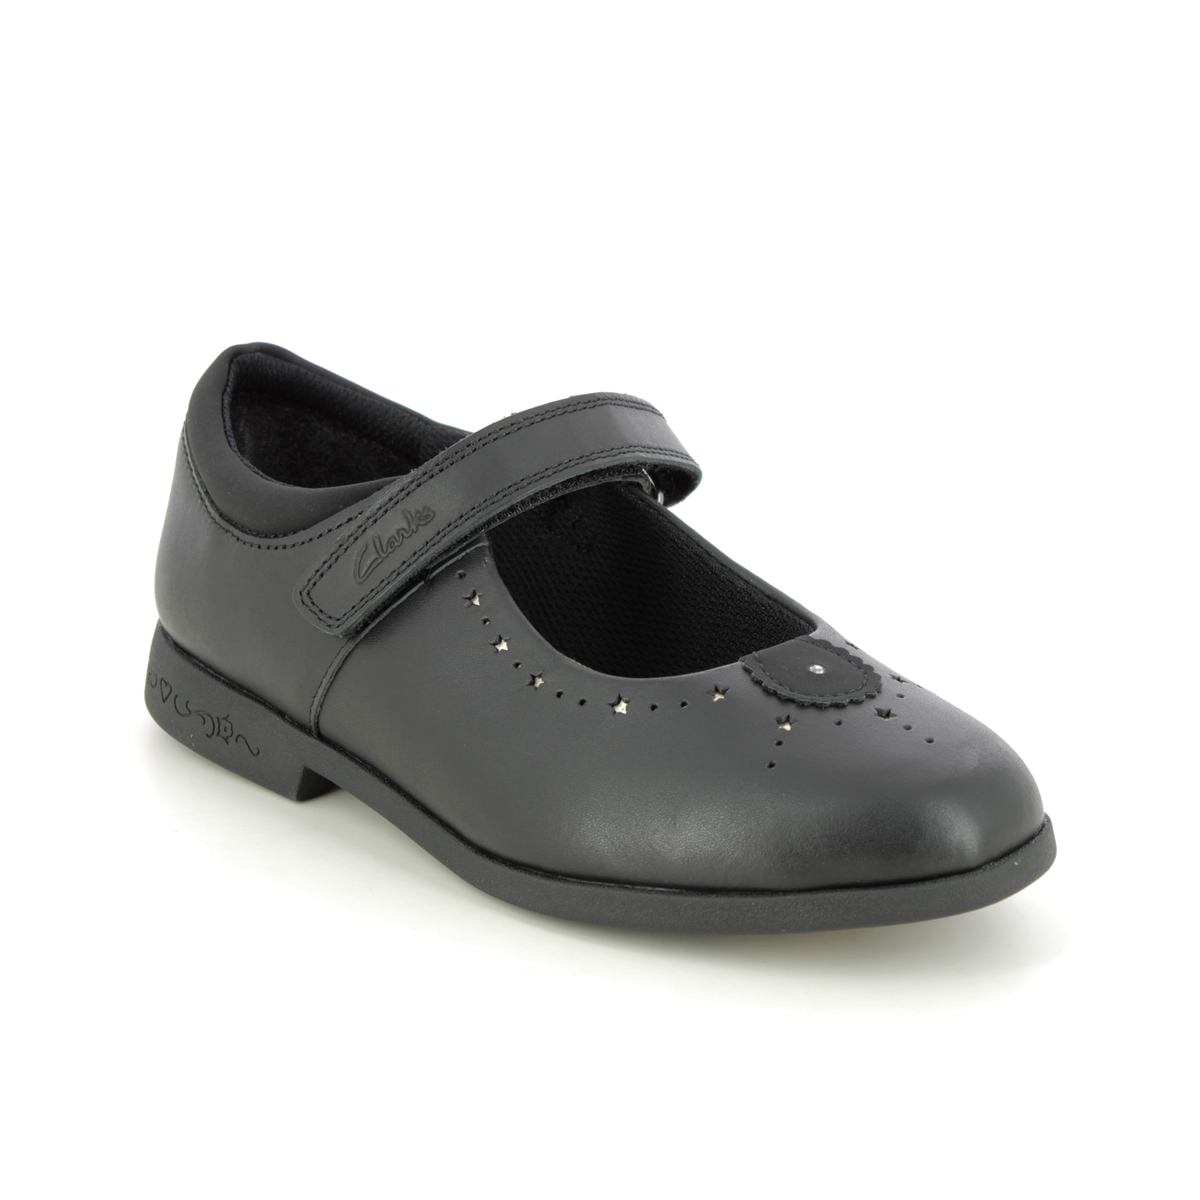 Clarks Magic Step Mj O Black leather Kids girls school shoes 6970-57G in a Plain Leather in Size 3.5